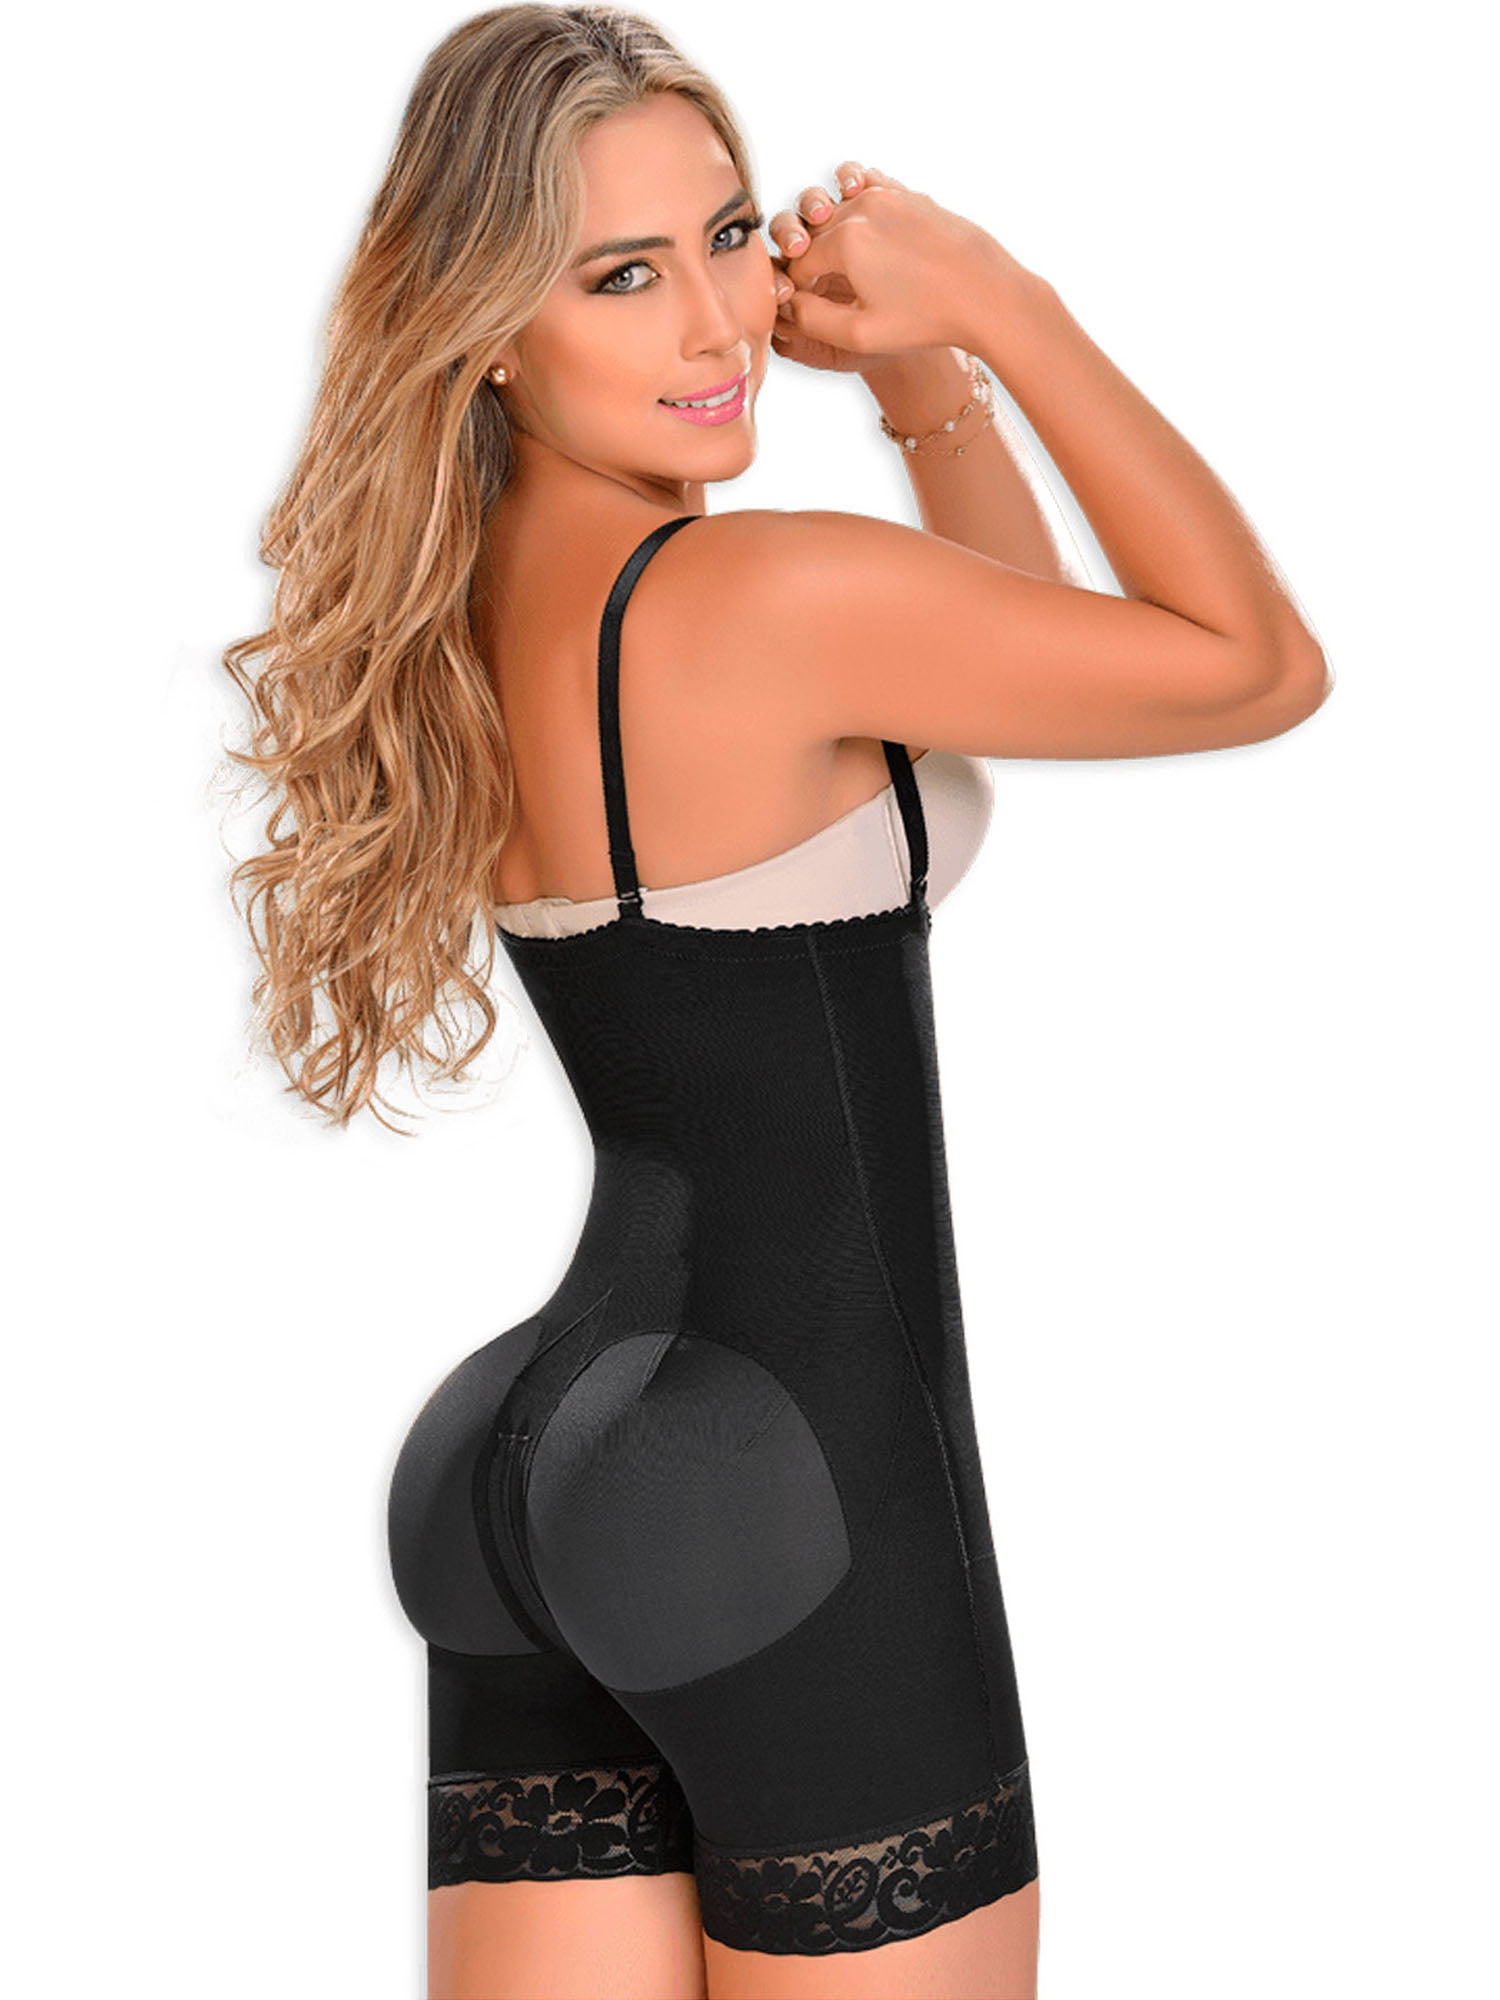  D066 Fajas Colombianas Post Surgery And Postpartum Tummy Tuck  Compression Garment For Women Black 4XL